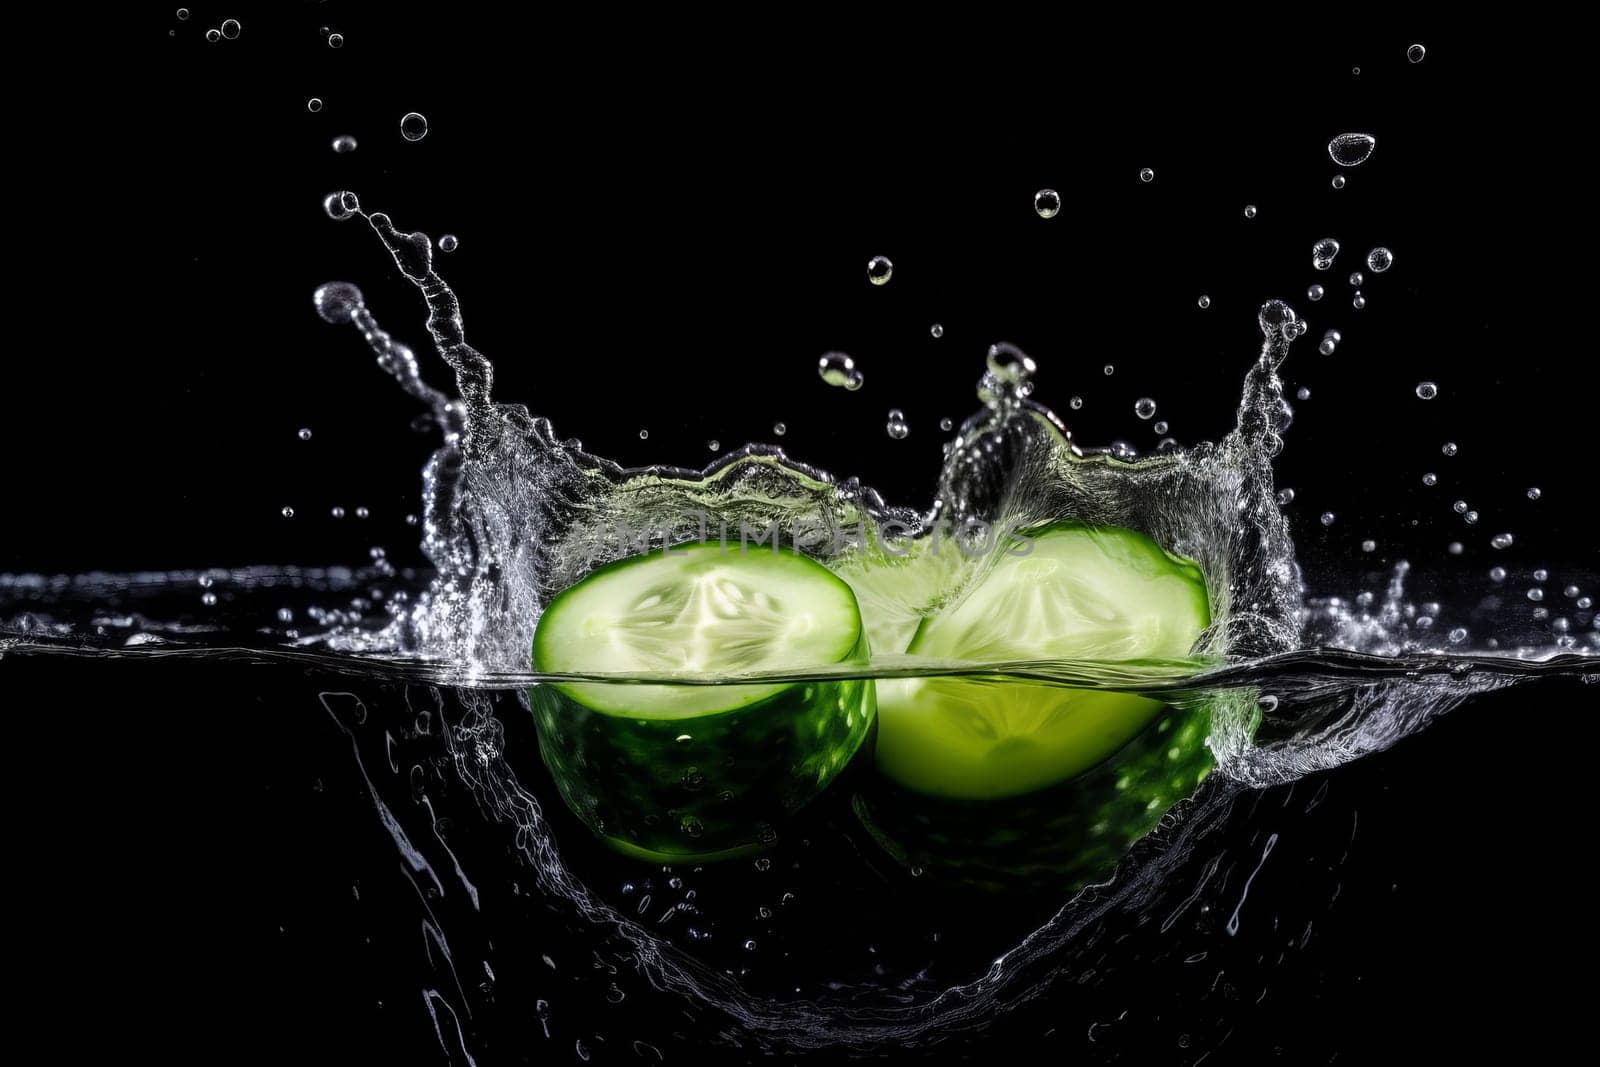 Cucumber on black background by ylivdesign